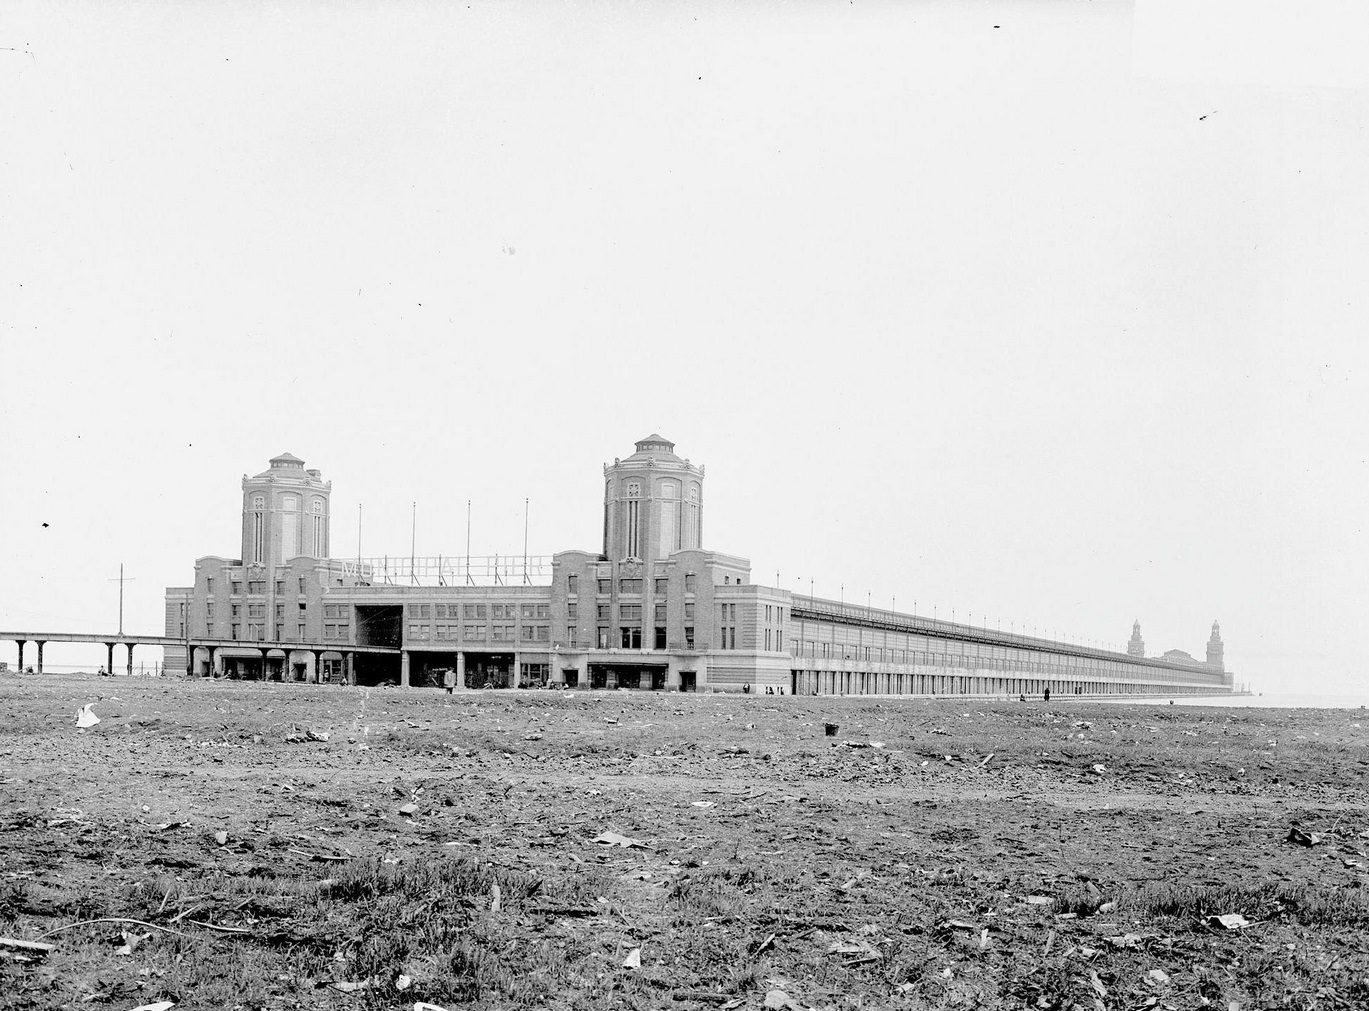 Municipal Pier (now called Navy Pier) under construction, seen from across a dirt field in front of it, in the Near North Side community area, Chicago, Illinois, 1910s.